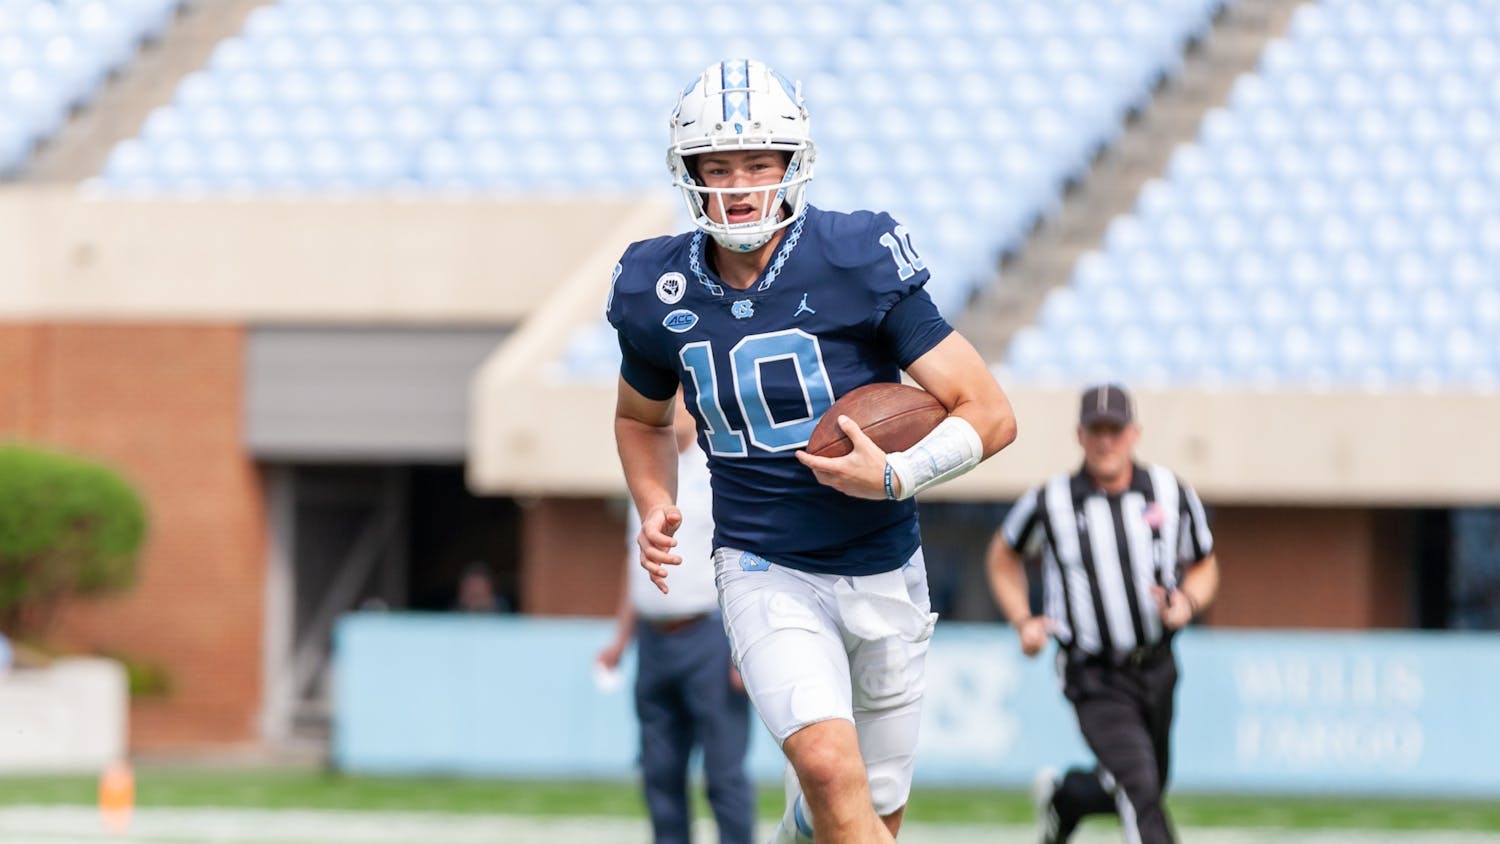 20230415 - UNC 2023 SPRING FOOTBALL GAME